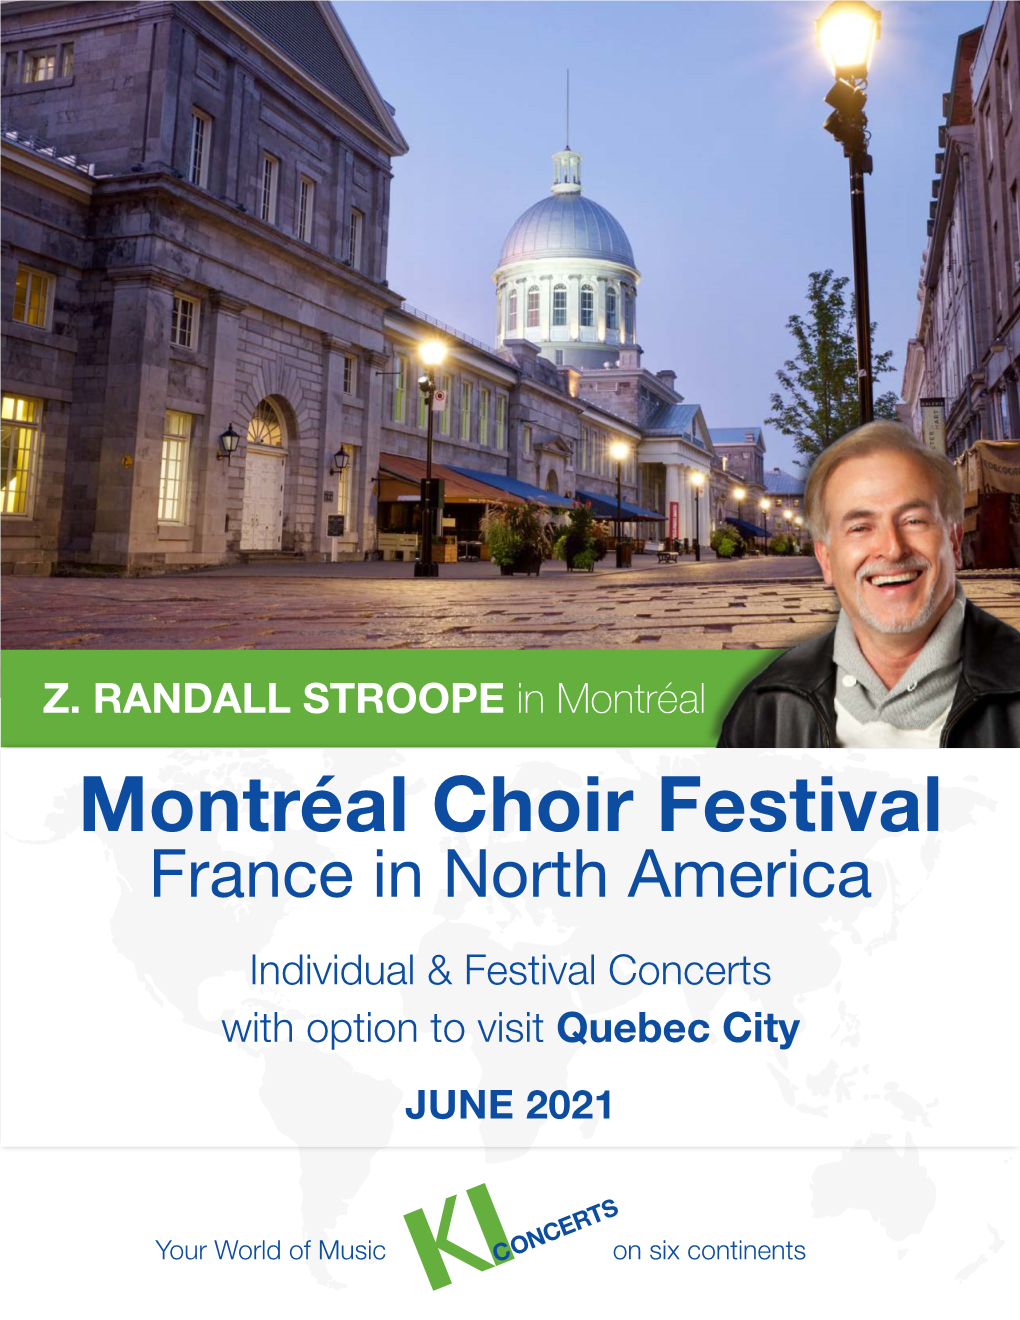 Montréal Choir Festival France in North America Individual & Festival Concerts with Option to Visit Quebec City JUNE 2021